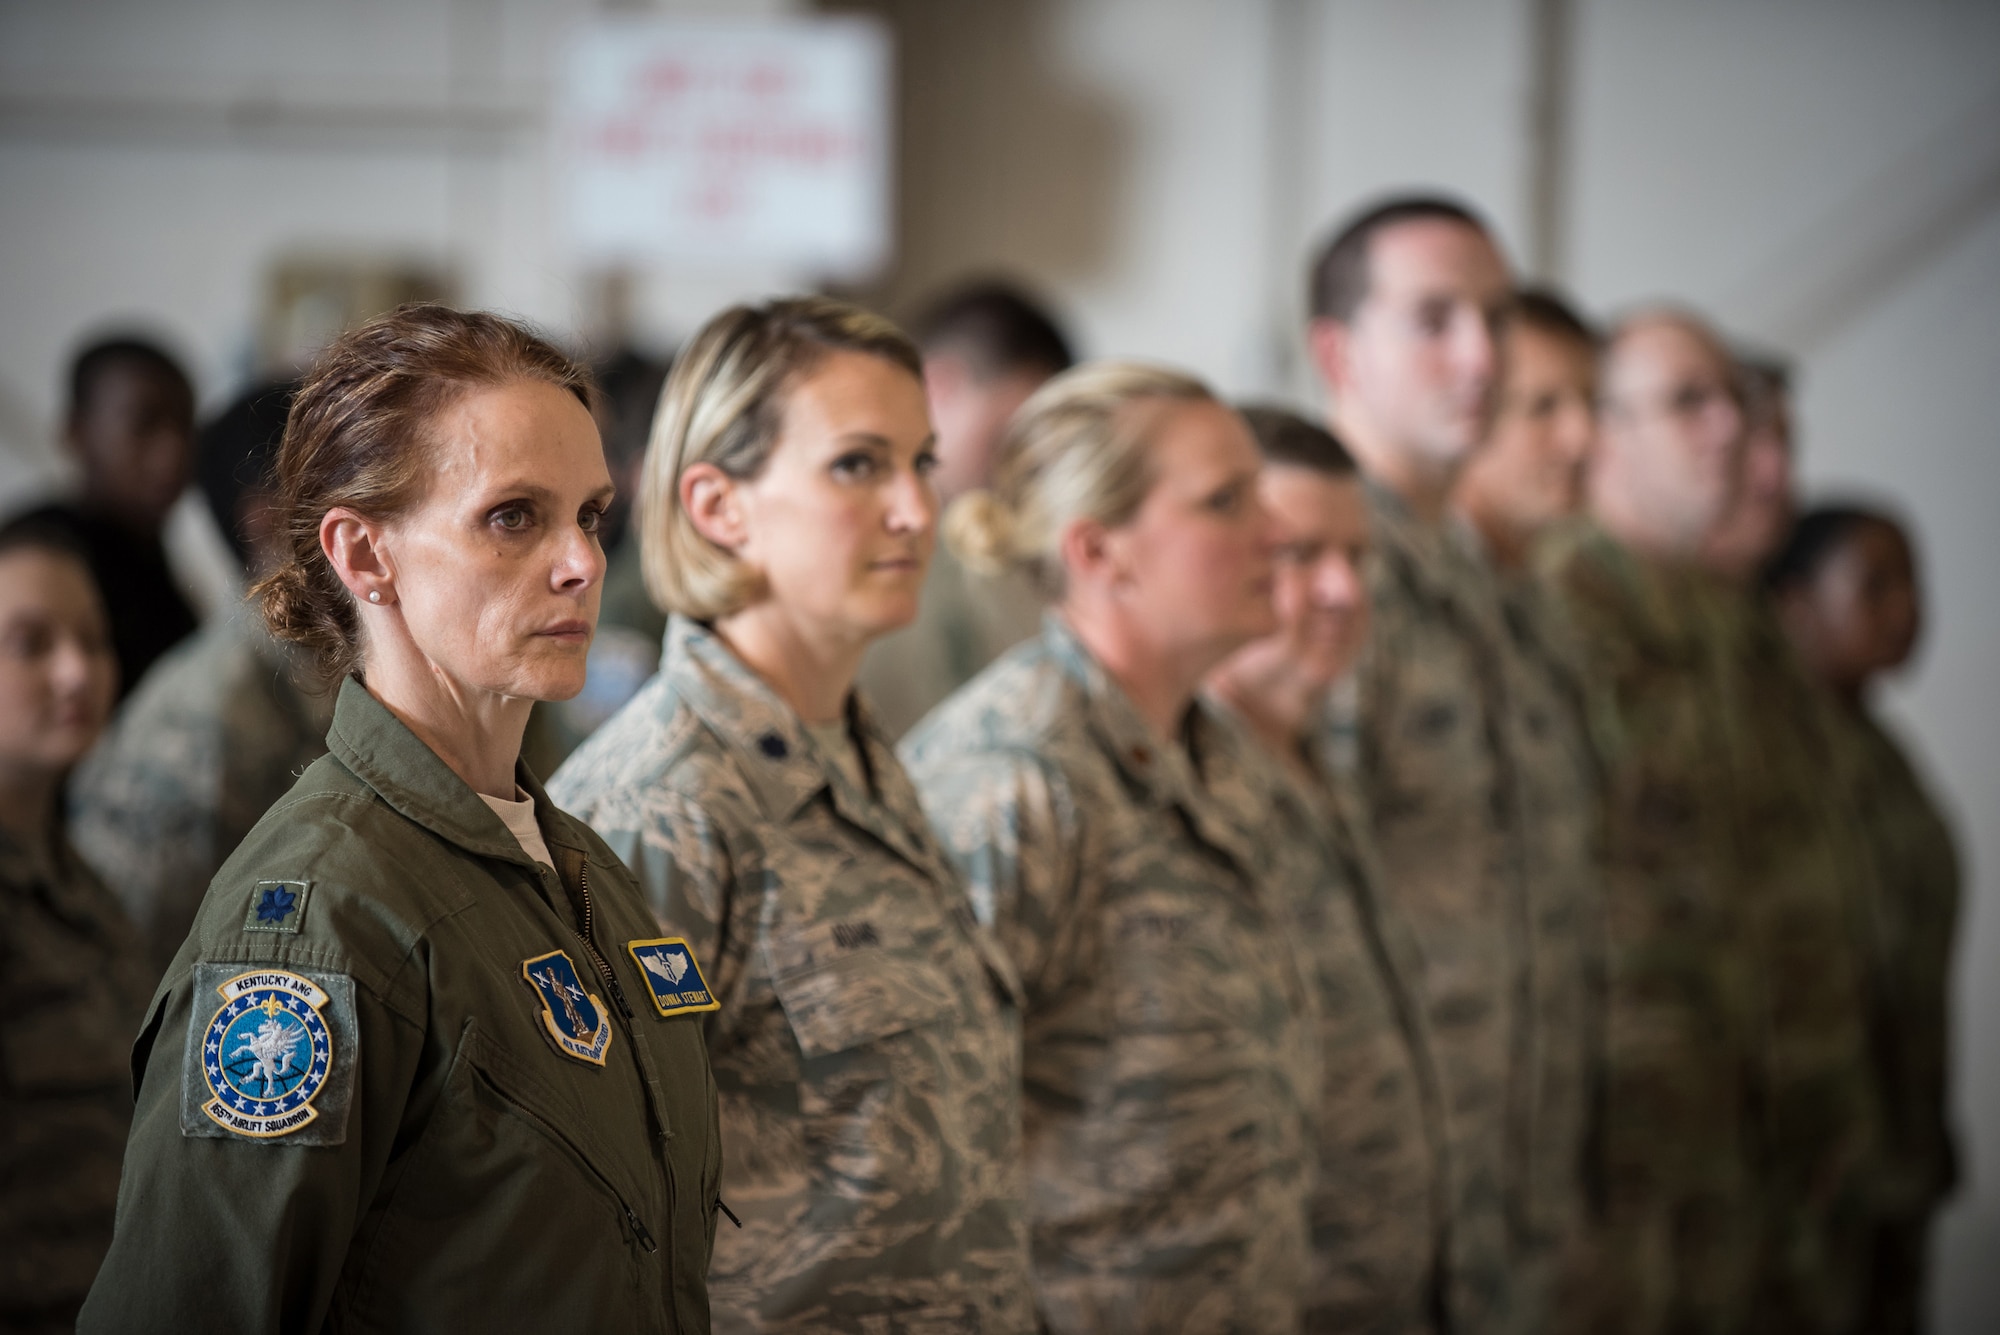 Members of the 123rd Airlift Wing attend a ceremony at the Kentucky Air National Guard Base in Louisville, Ky., Aug 10, 2019, during which the Air Force chief of staff, Gen. David L. Goldfein, presented the Distinguished Flying Cross to a Kentucky Air Guard pilot. The pilot, Lt. Col. John "J.T." Hourigan, earned the medal for decisive action following a catastrophic mechanical failure while flying a C-130 Hercules aircraft during a routine training sortie, saving the lives of six crew members and a $30 million aircraft. Flight Surgeon Lt. Col. Donna Stewart (far left) was one of those crew members. (U.S. Air National Guard photo by Lt. Col. Dale Greer)